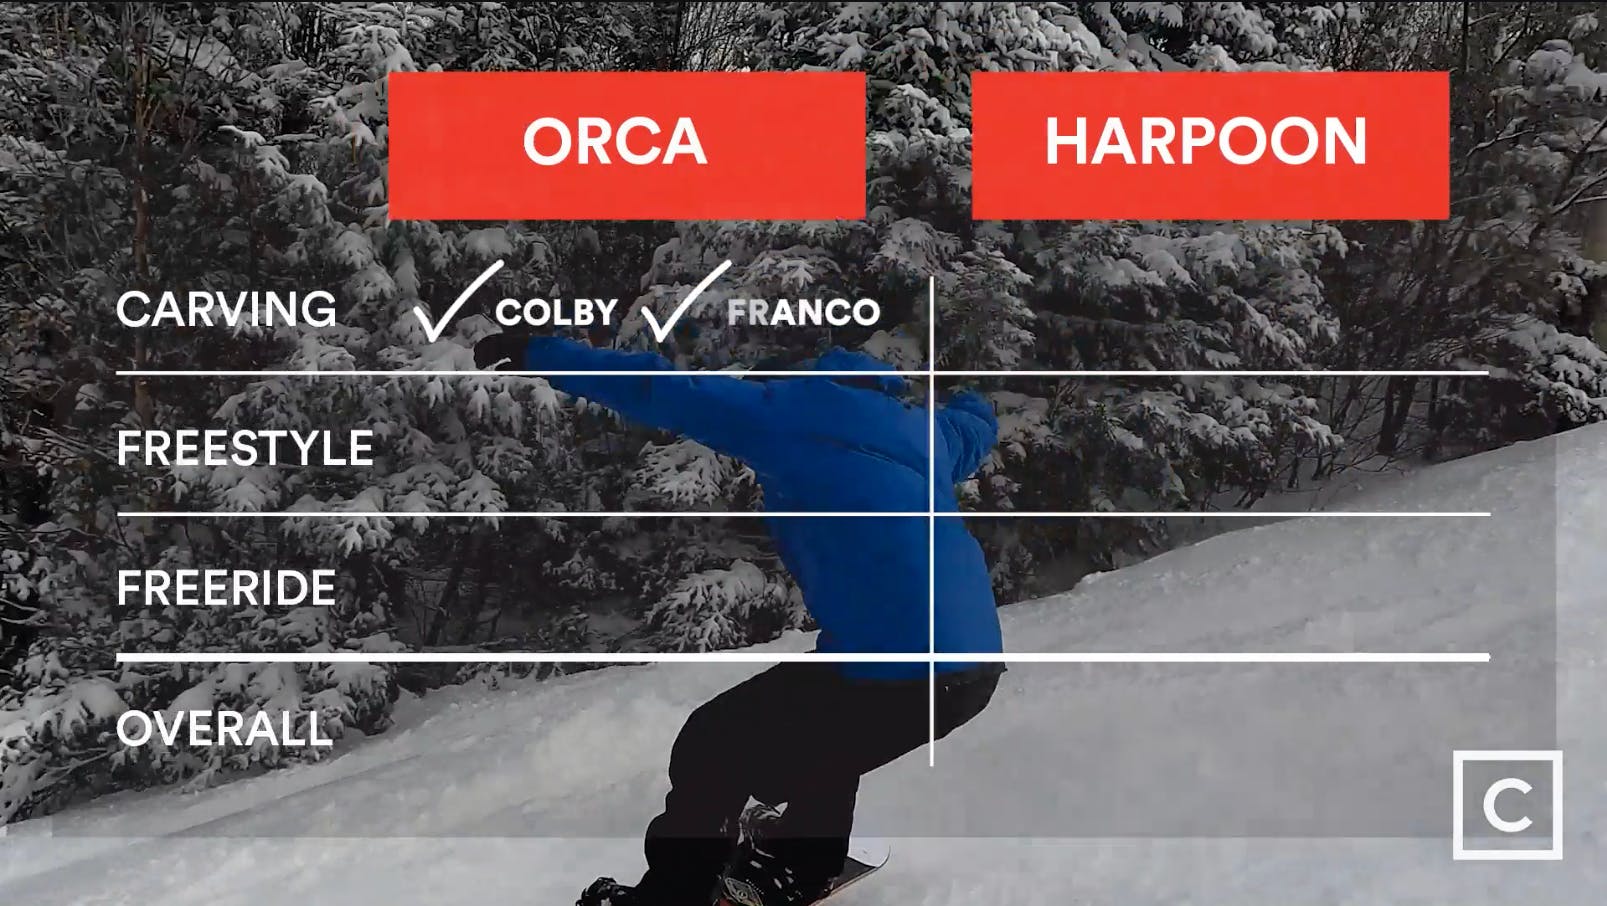 Leaderboard - both Franco and Colby prefer the Lib Tech Orca for carving